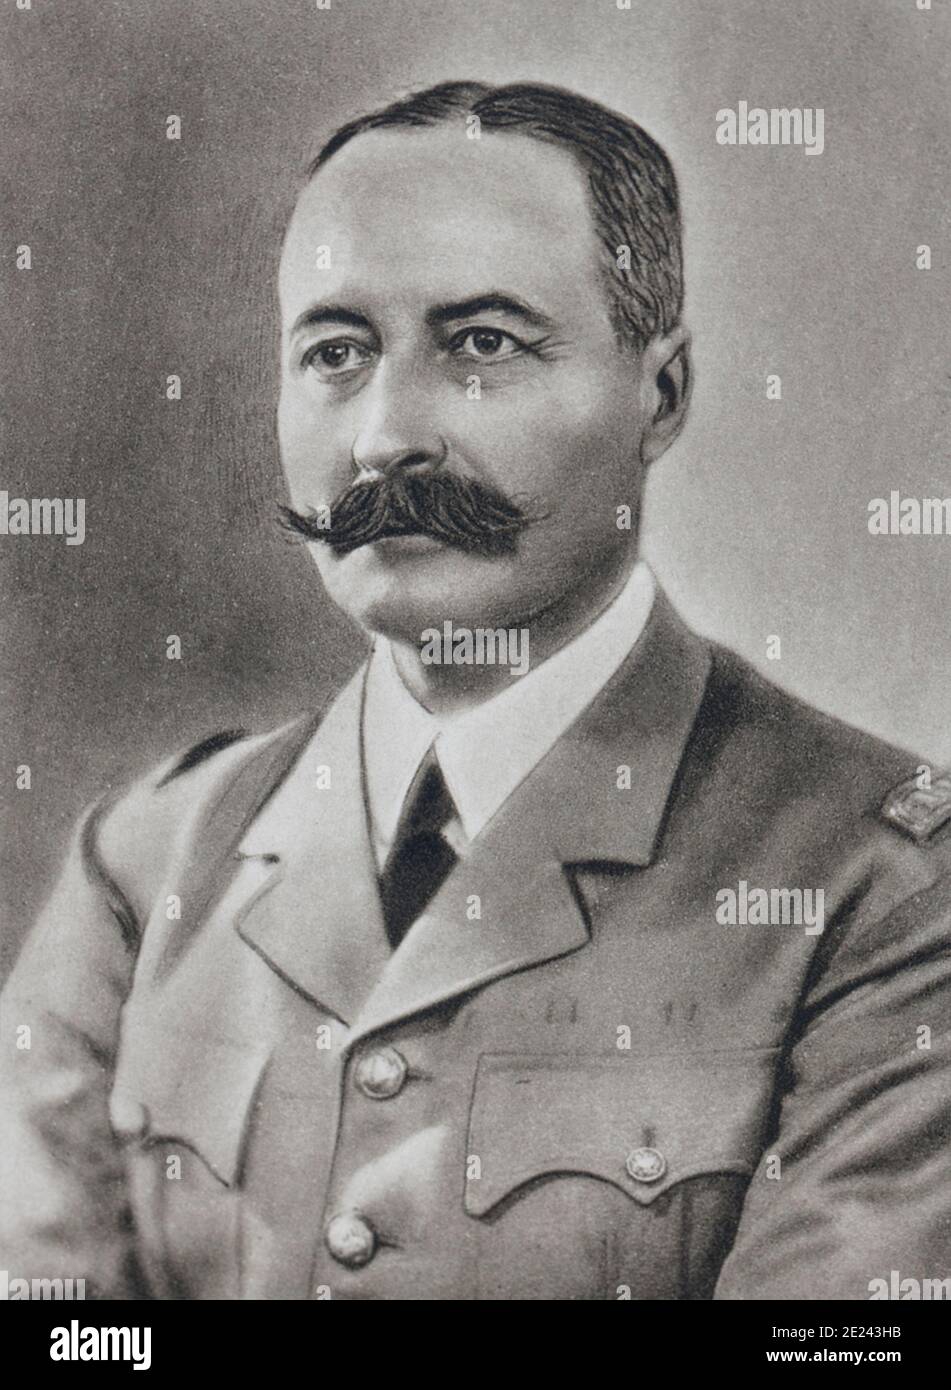 General Giraud, commander of the 7th, then the 9th French Army. Stock Photo